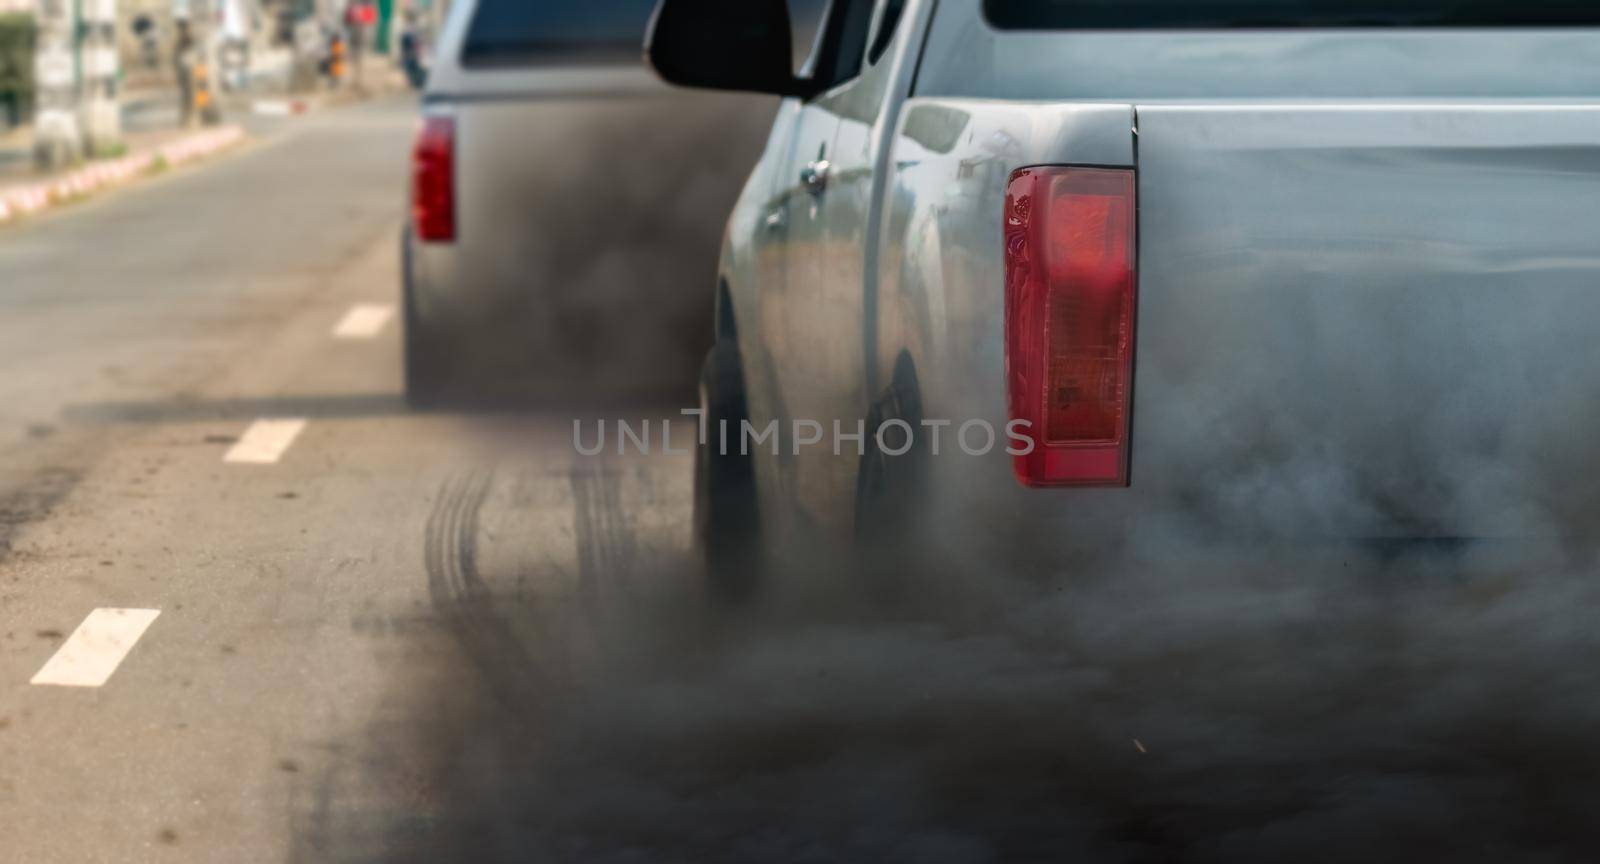 air pollution crisis in city from diesel vehicle exhaust pipe on road